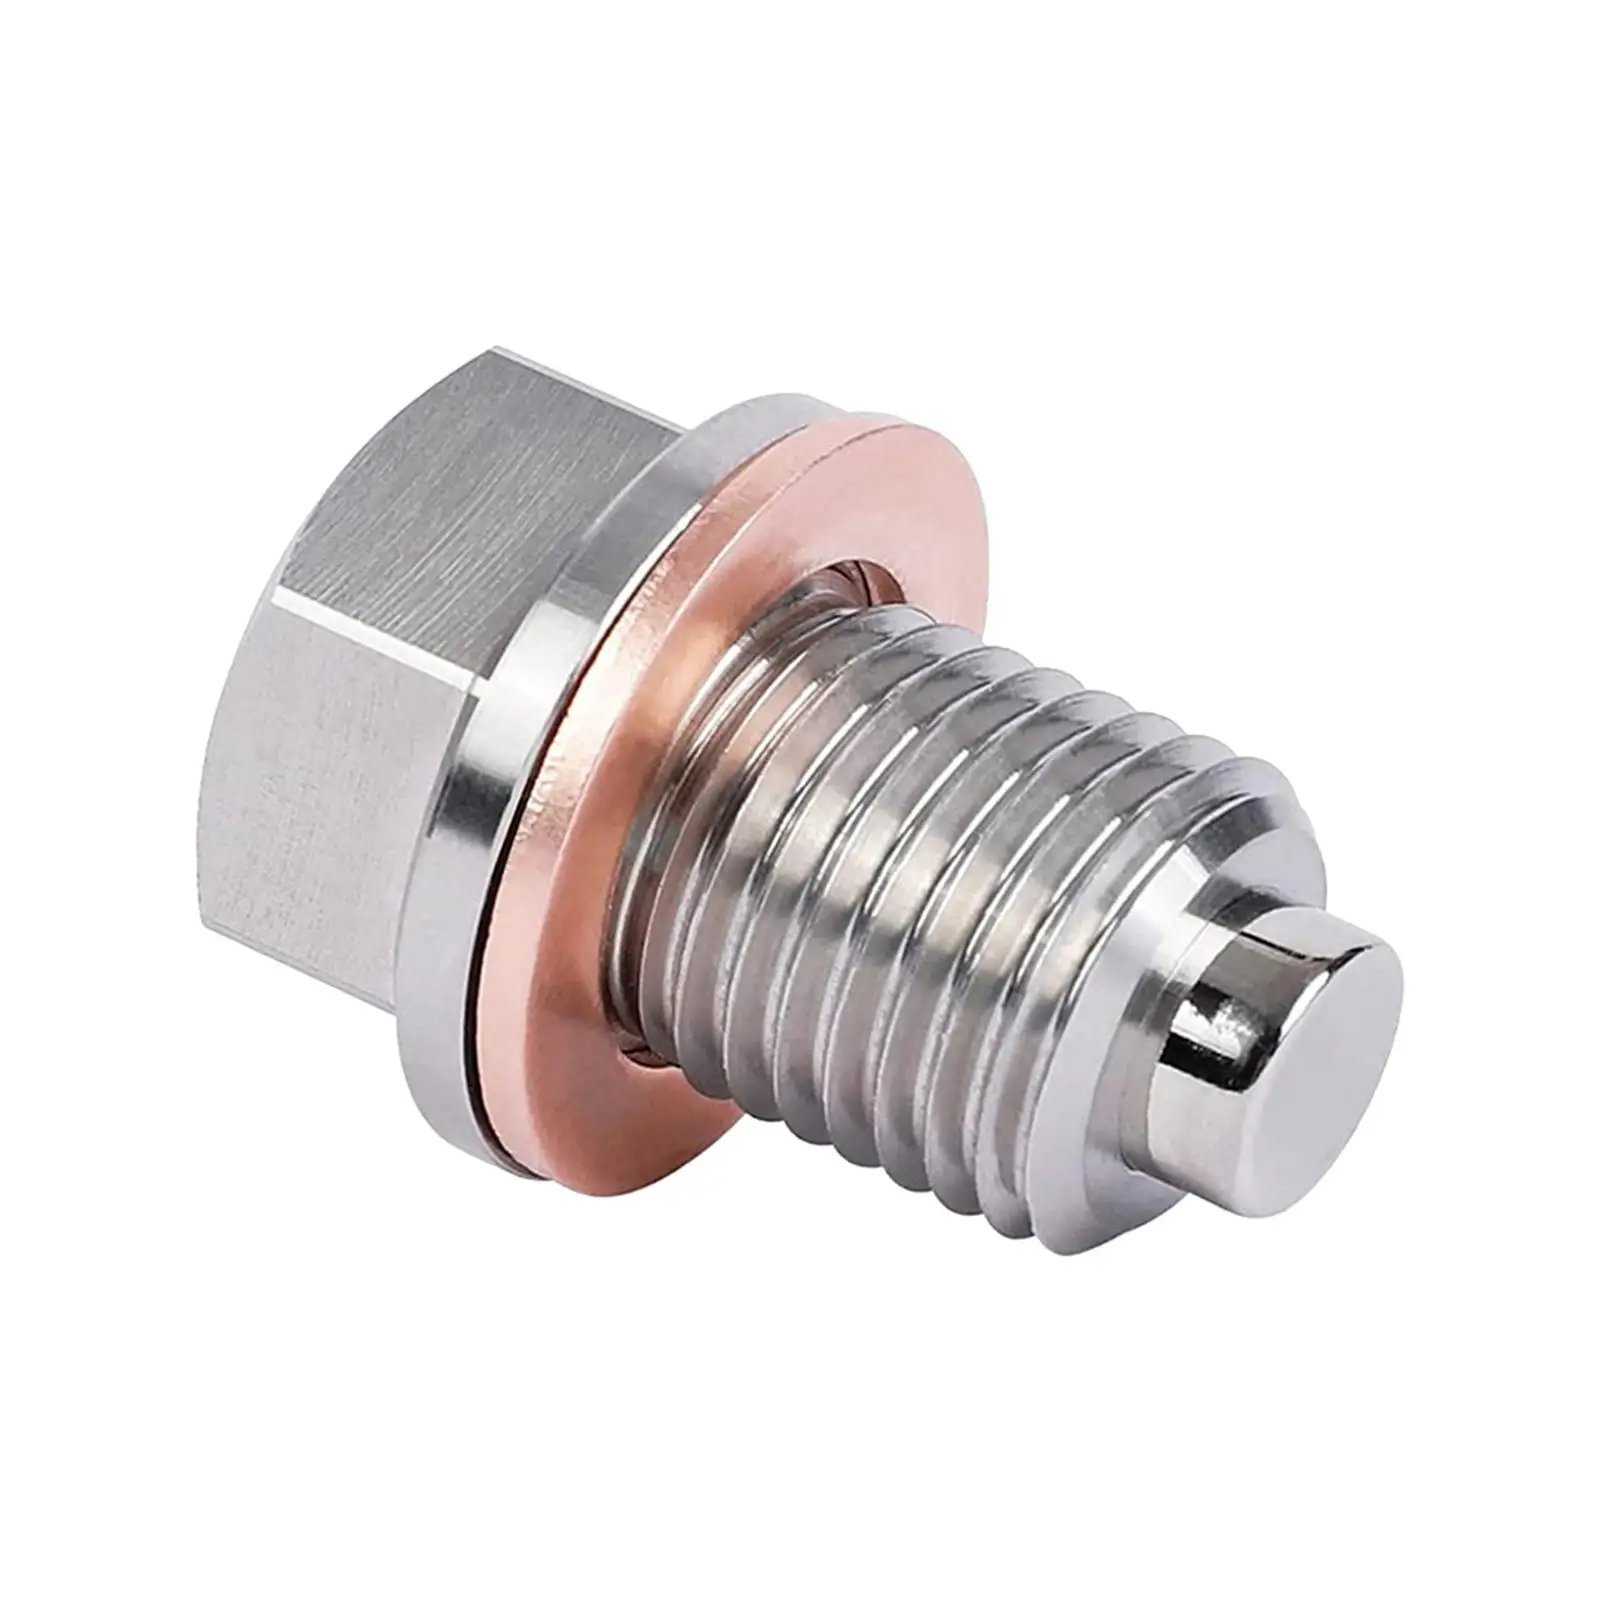 Oil Drain Plug Screw M12x1.5 Replace Accessory Easy to Install Sump Drain Nut Engine Oil Pan Protection Plug for Motorcycle